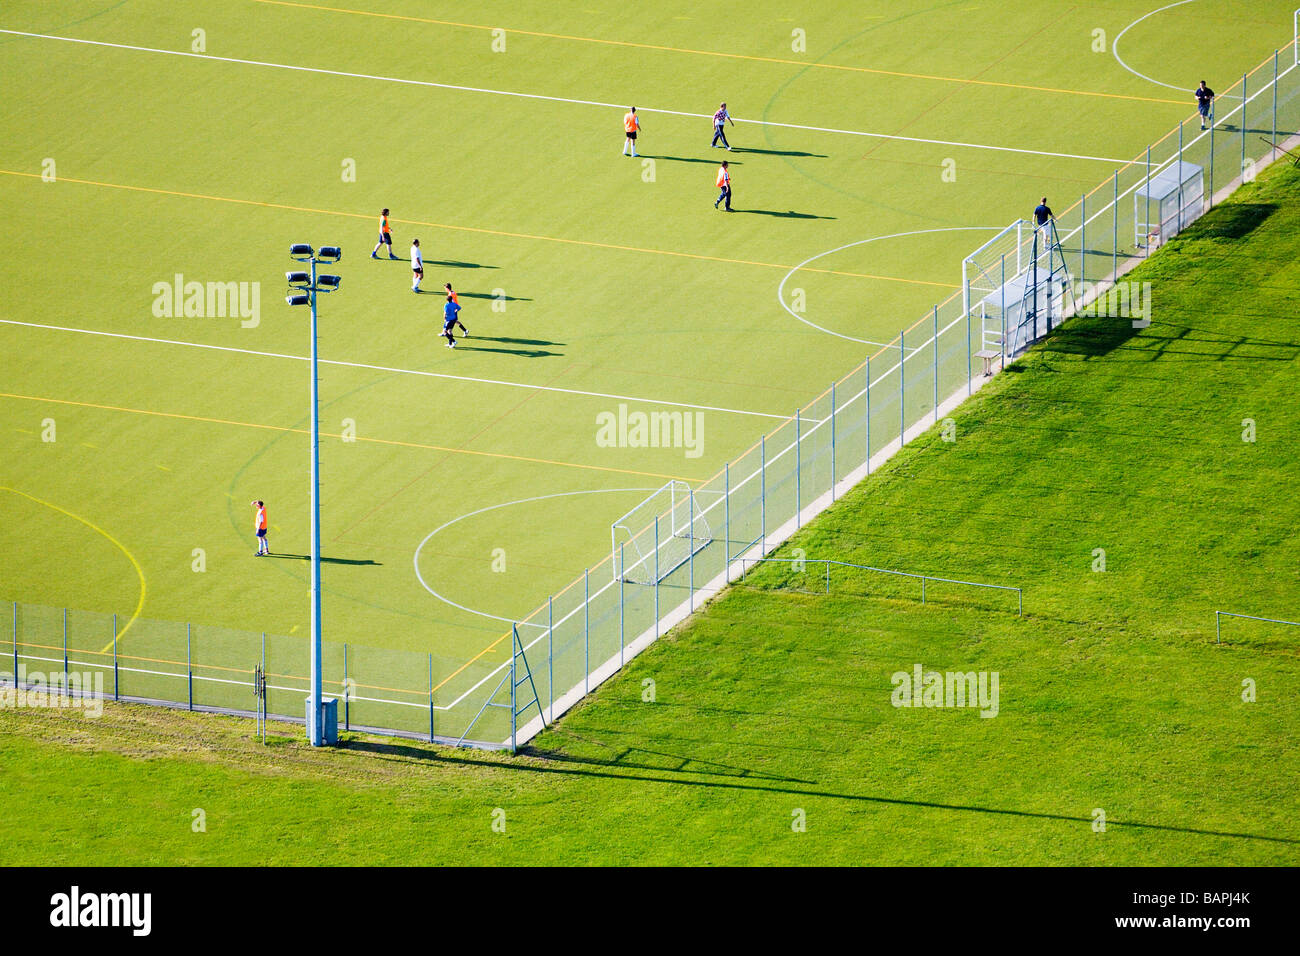 Aerial view of a sports field. Games of five-a-side football / soccer  in progress. Dorset. UK. Stock Photo